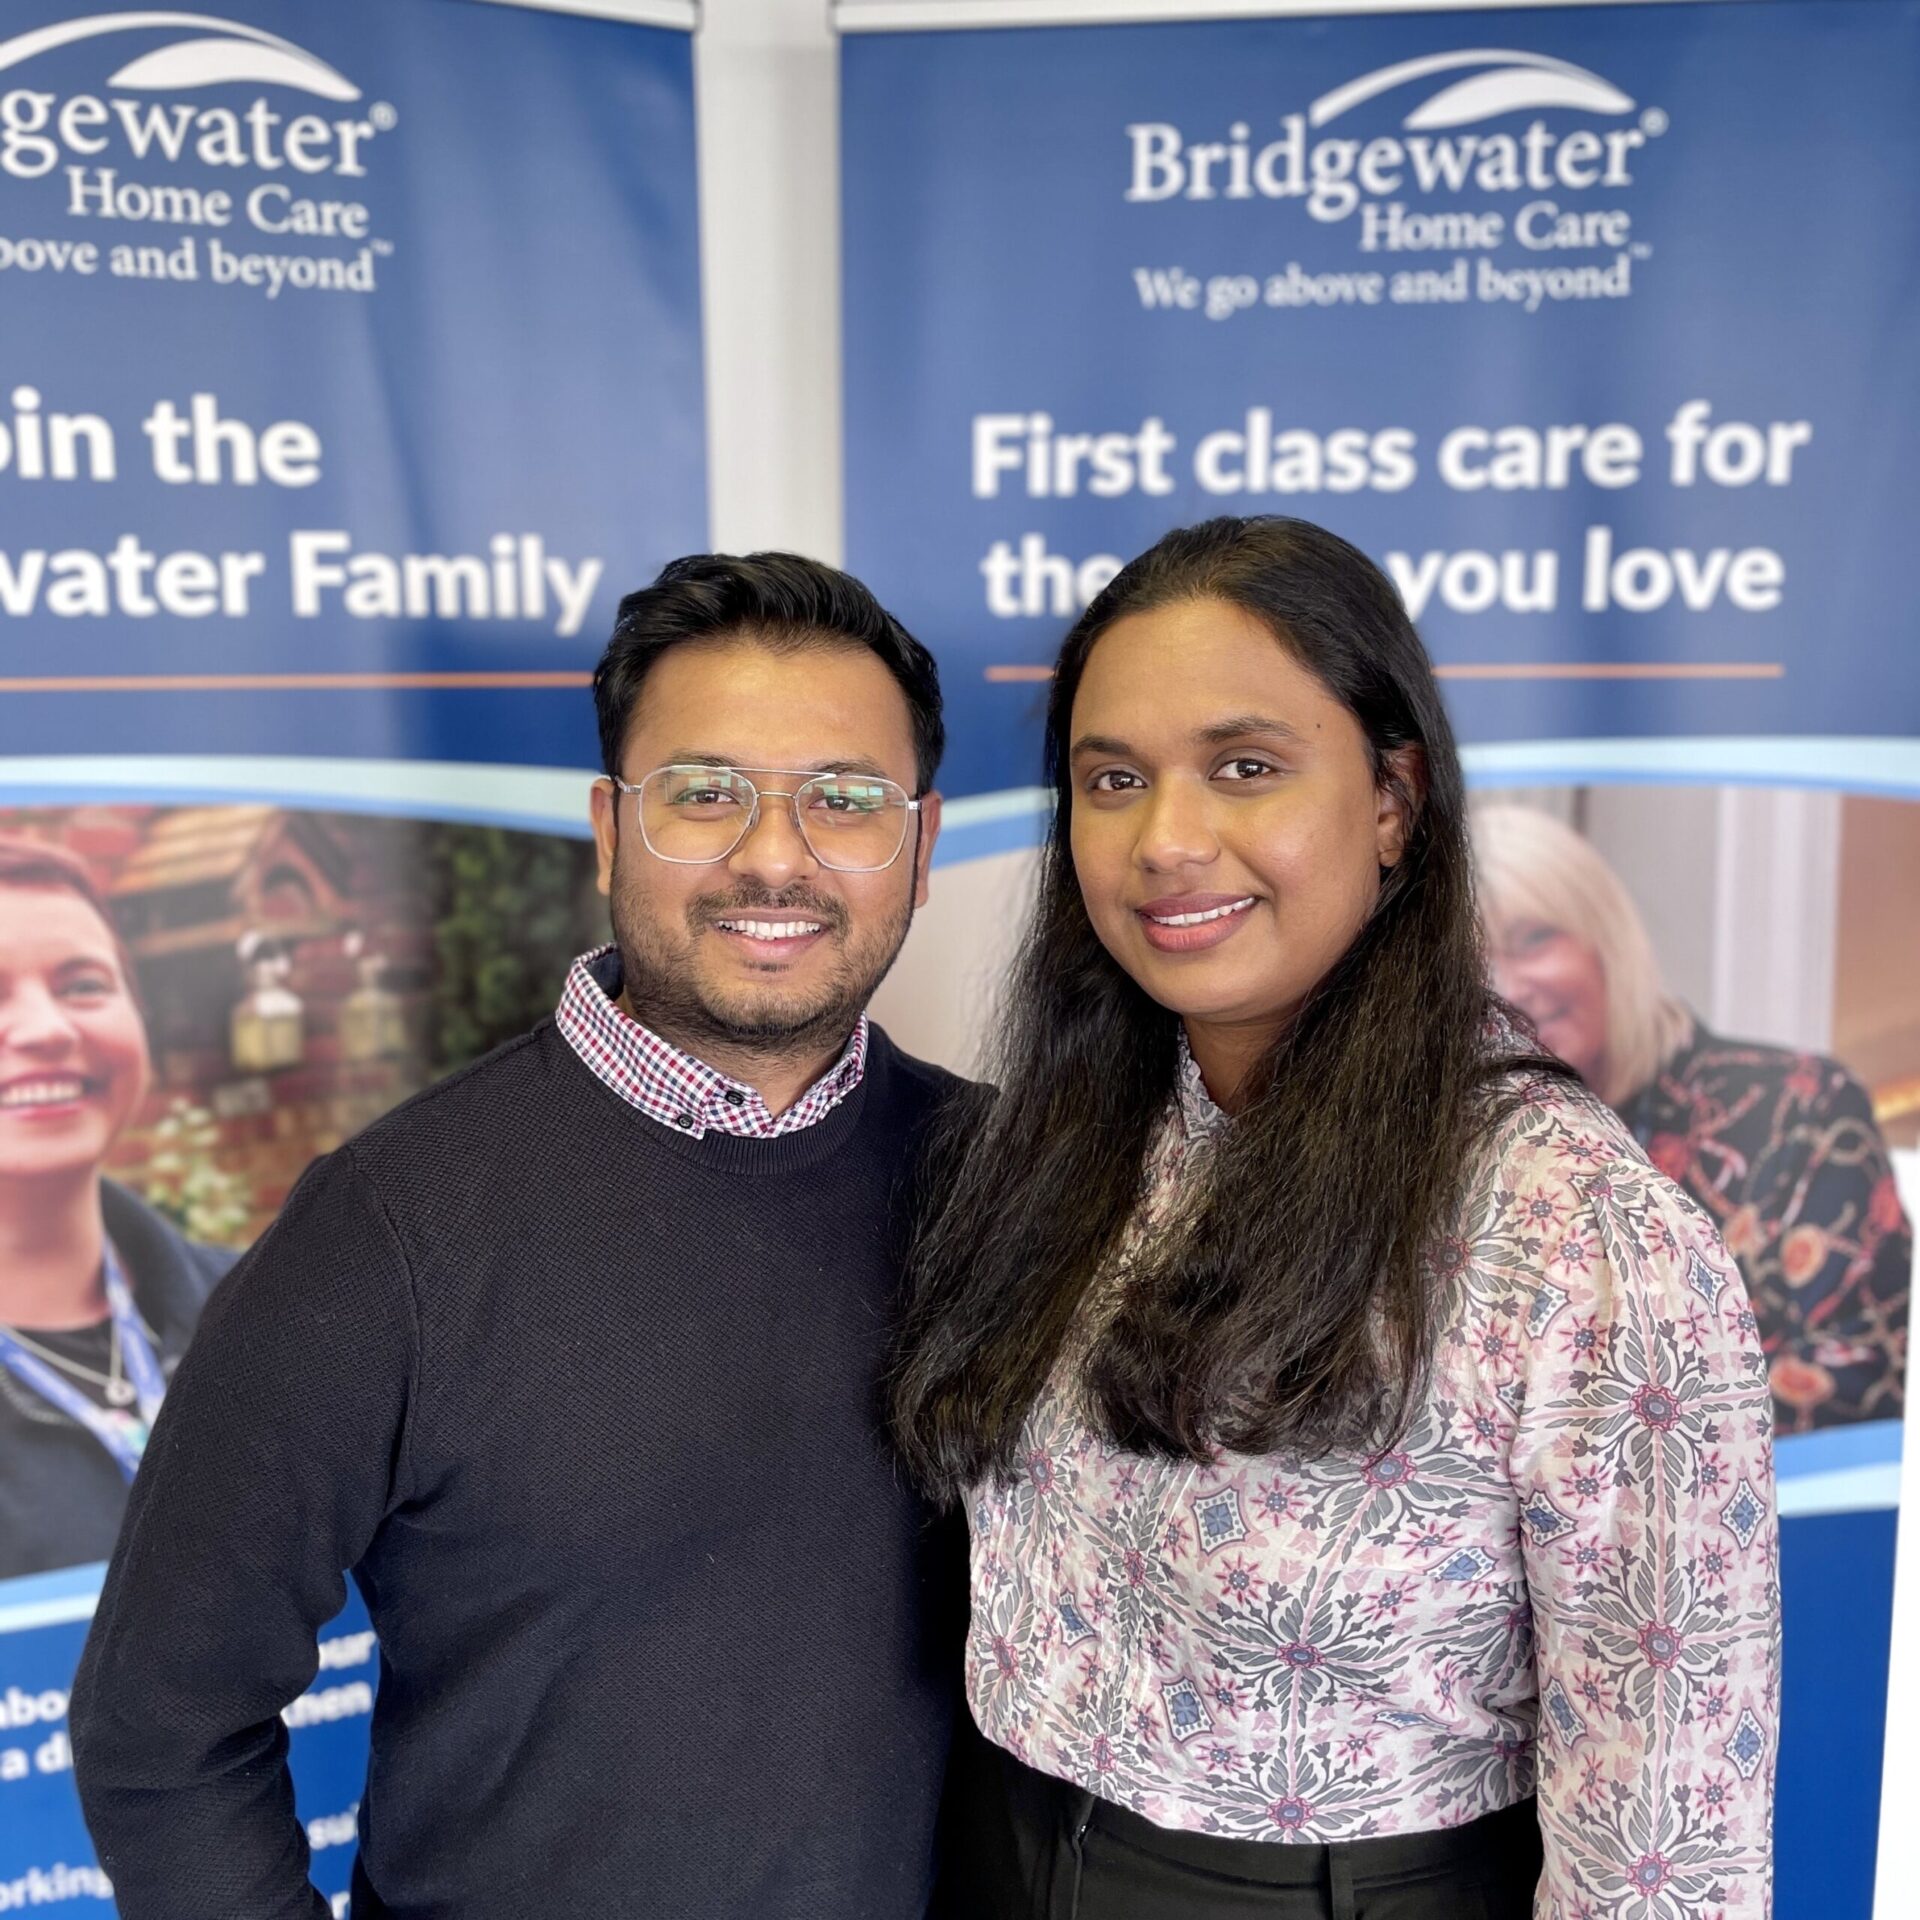 Bridgewater Home Care’s growing franchise network